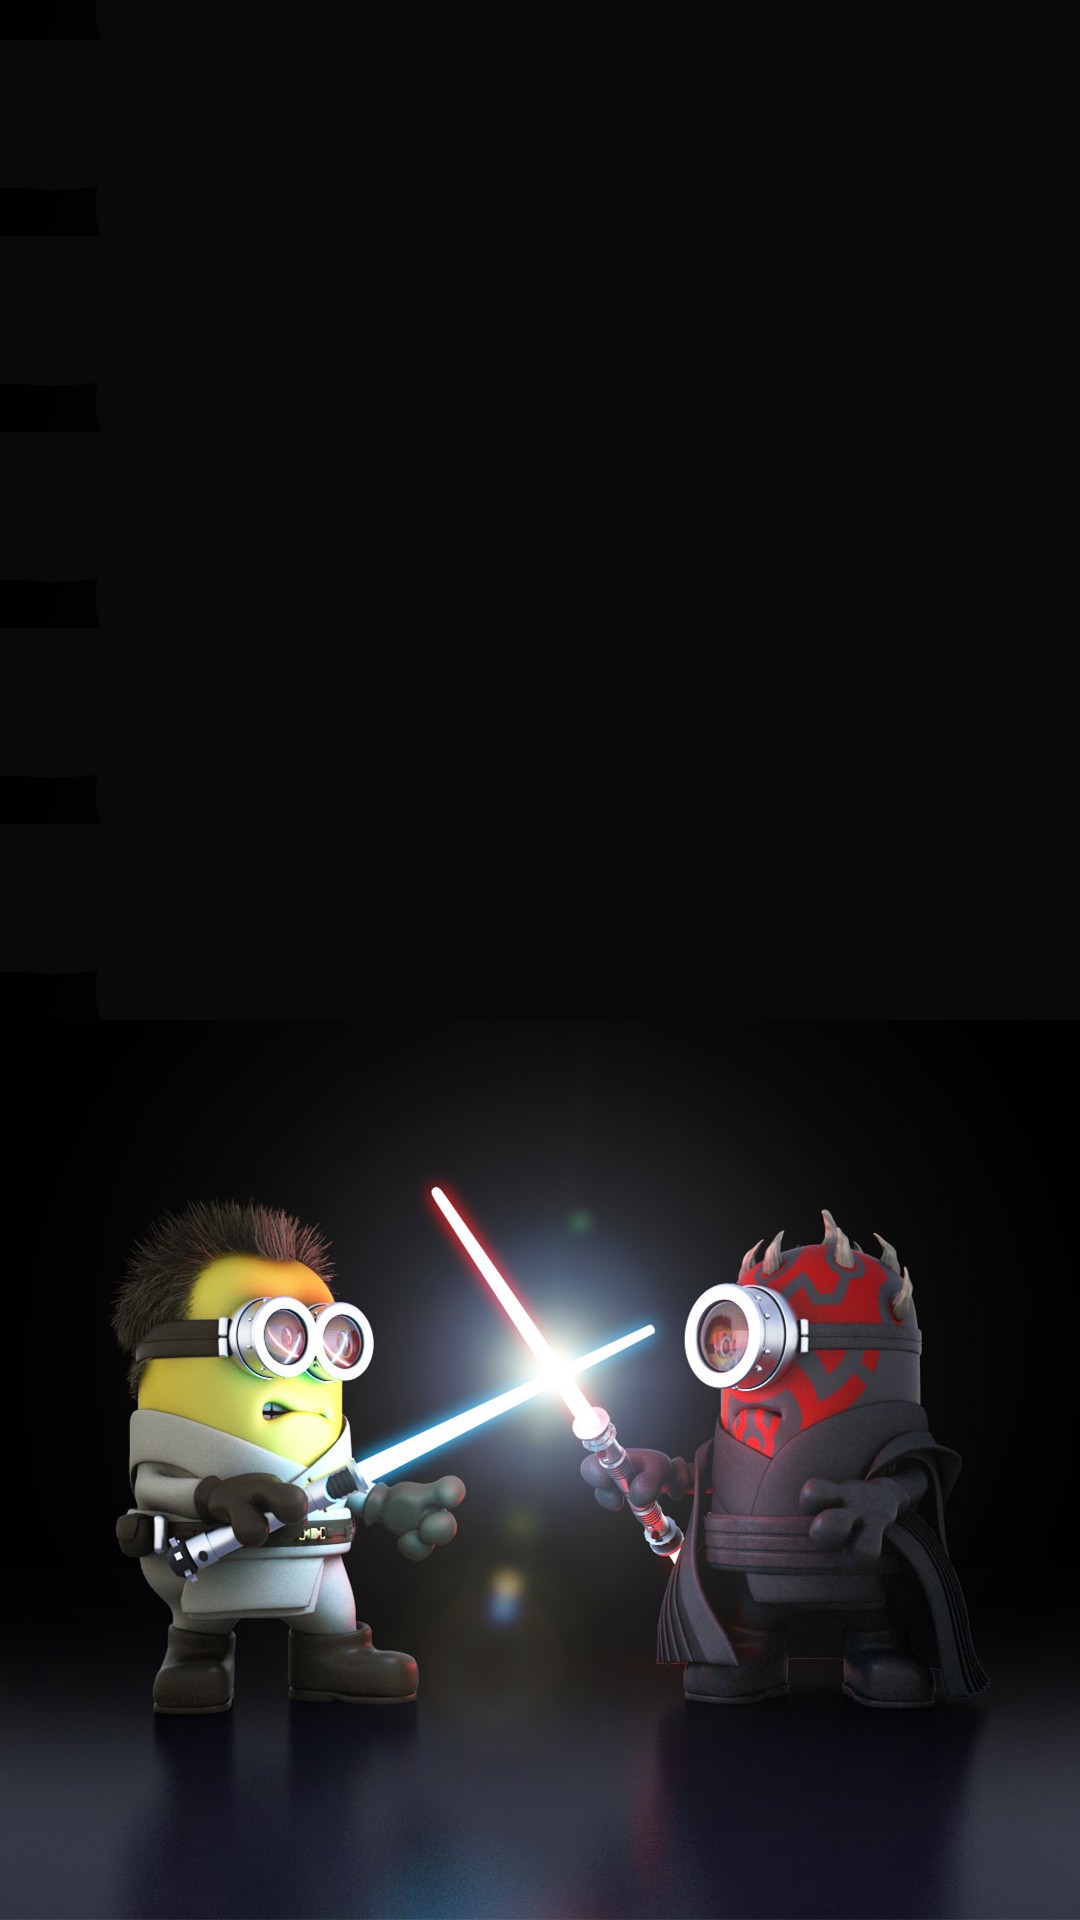 Awesome Despicable Me Inspired Minions Star Wars